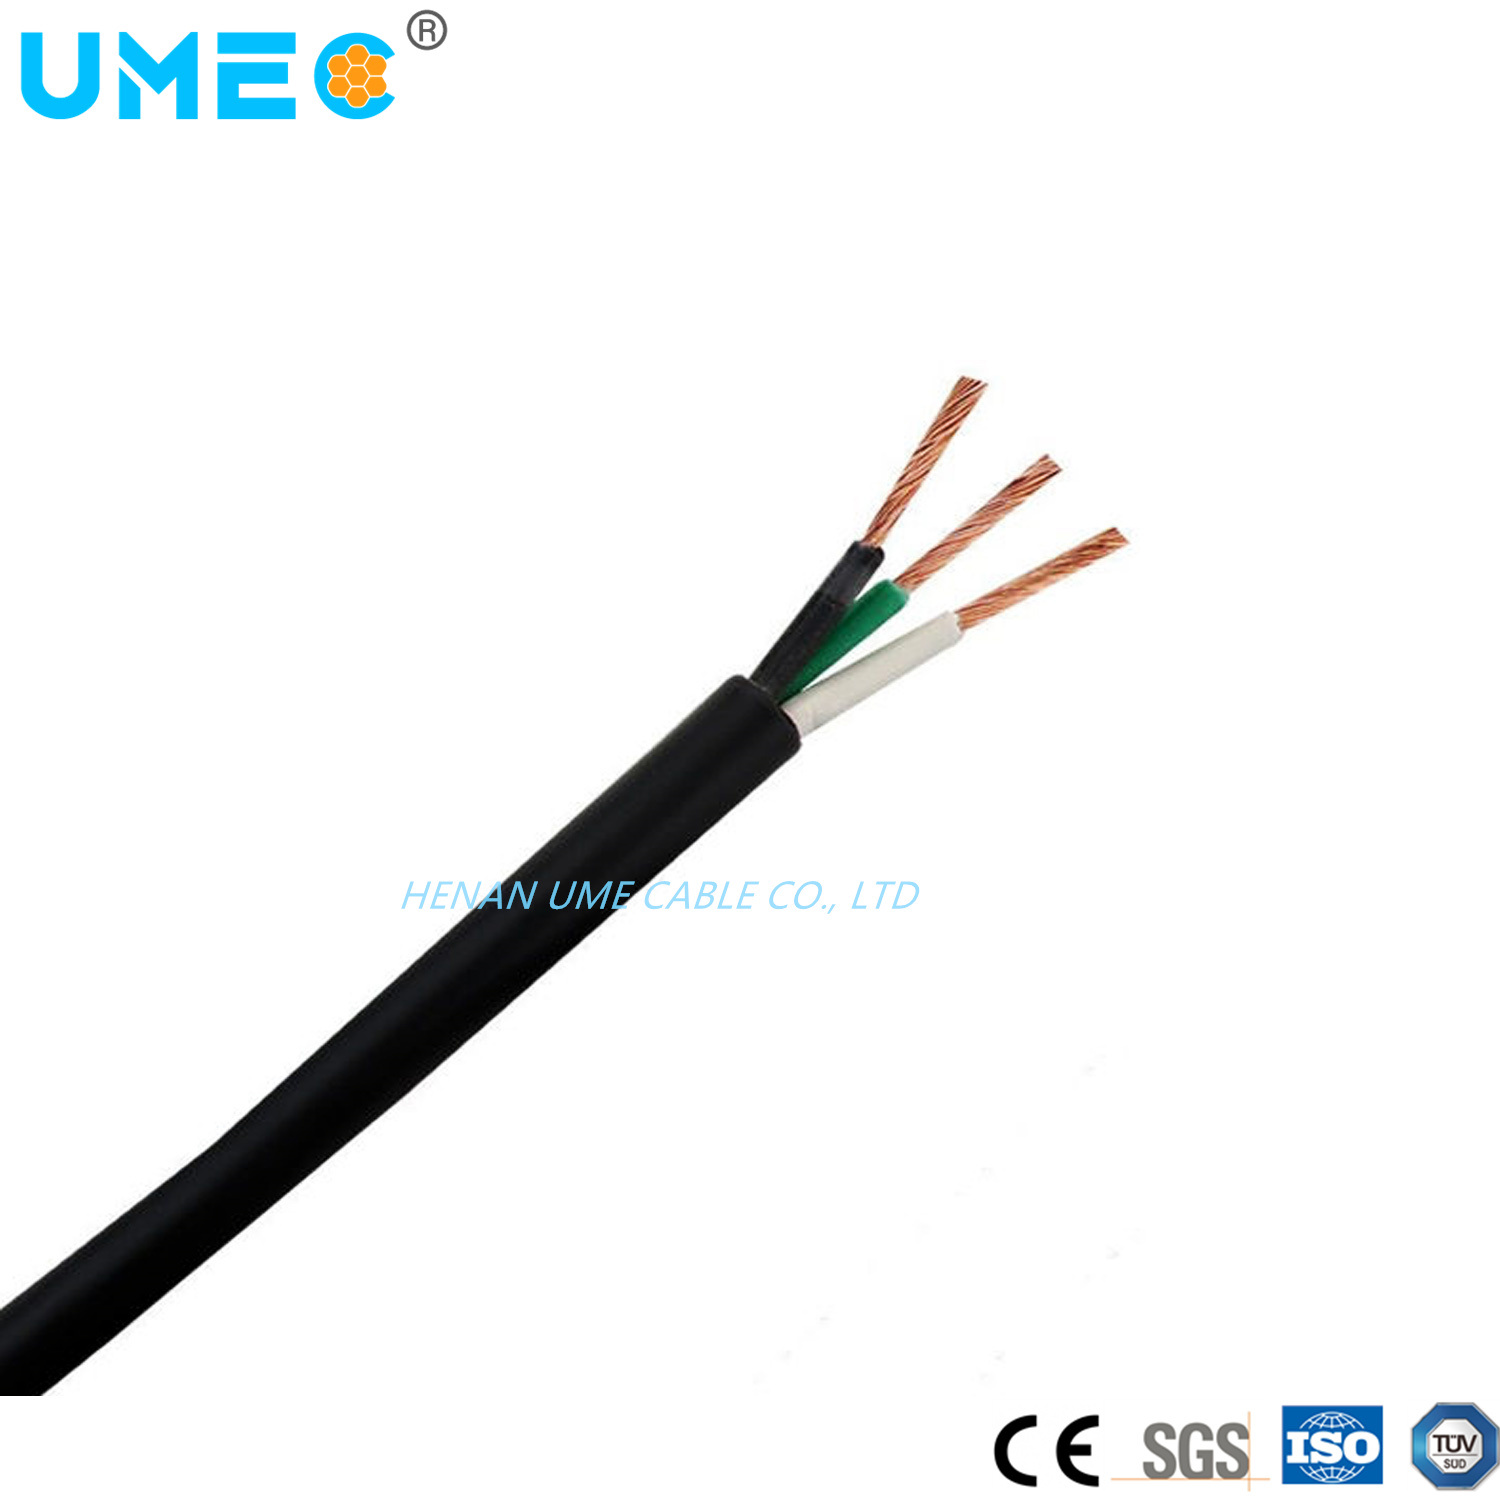 Flexible Installation Cables 300/500V PVC Insulated Sheathed H05vvf Wire